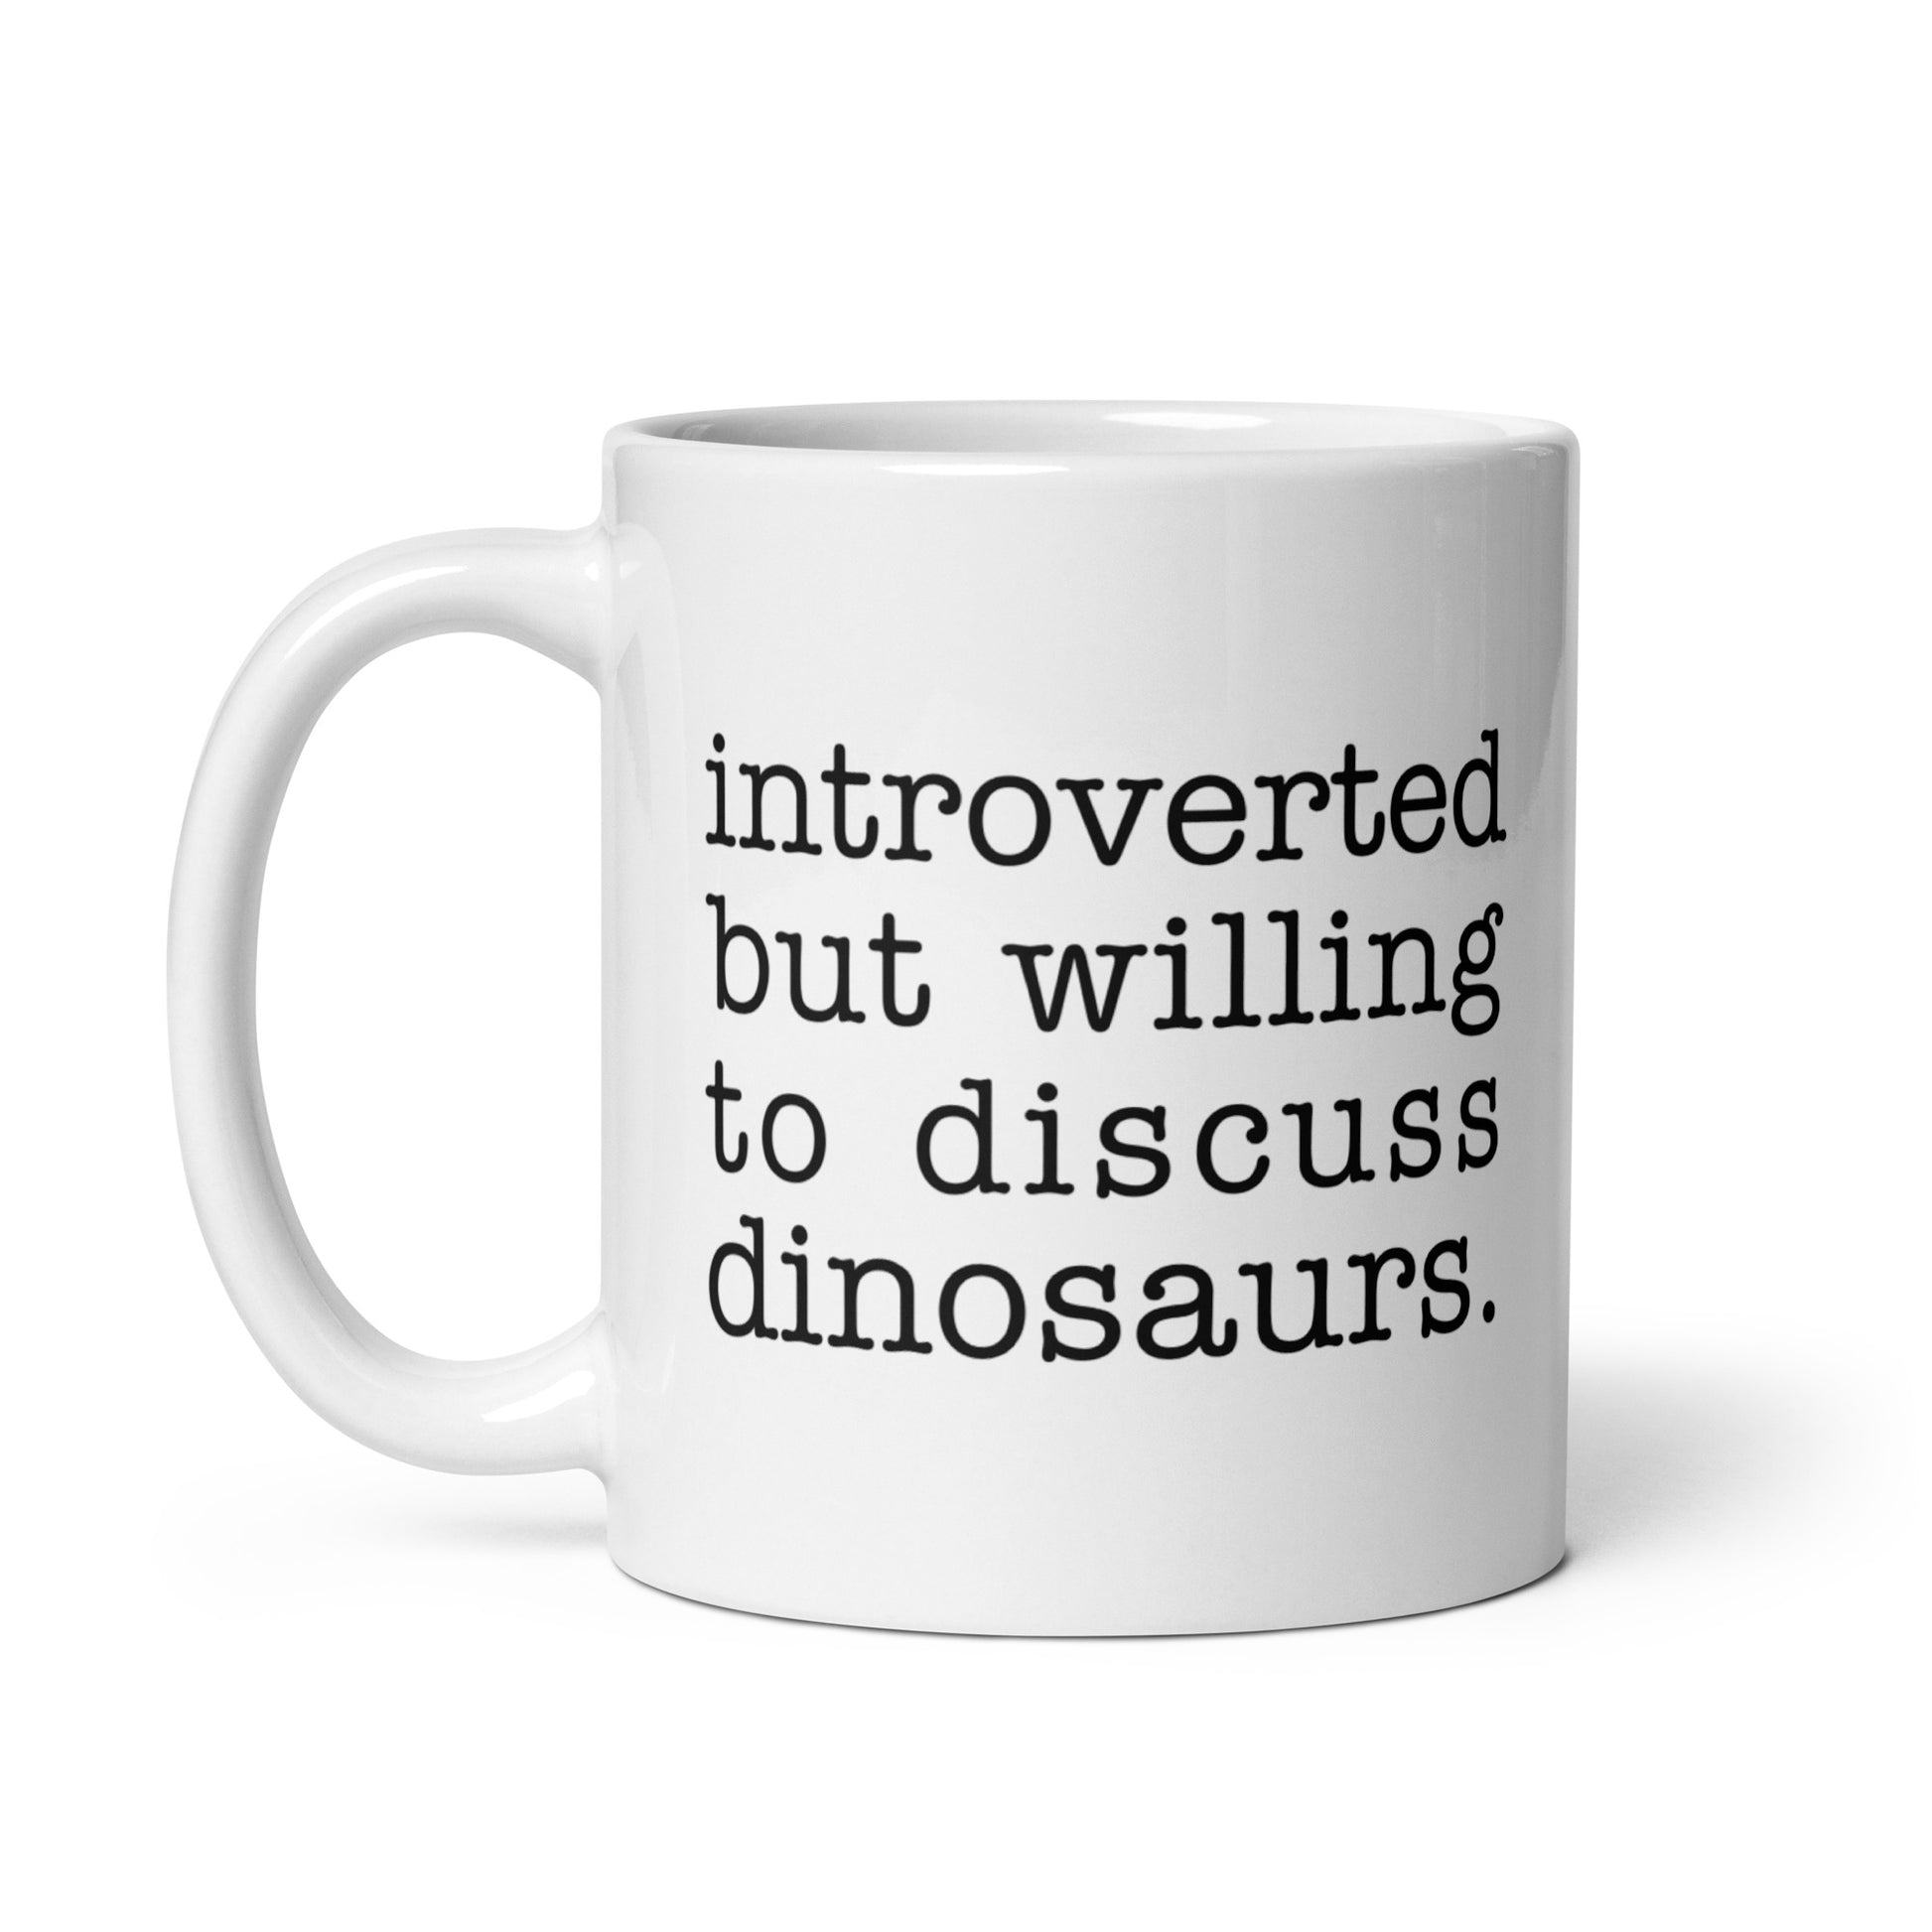 A white 11 ounce ceramic mug with text reading "introverted but willing to discuss dinosaurs"